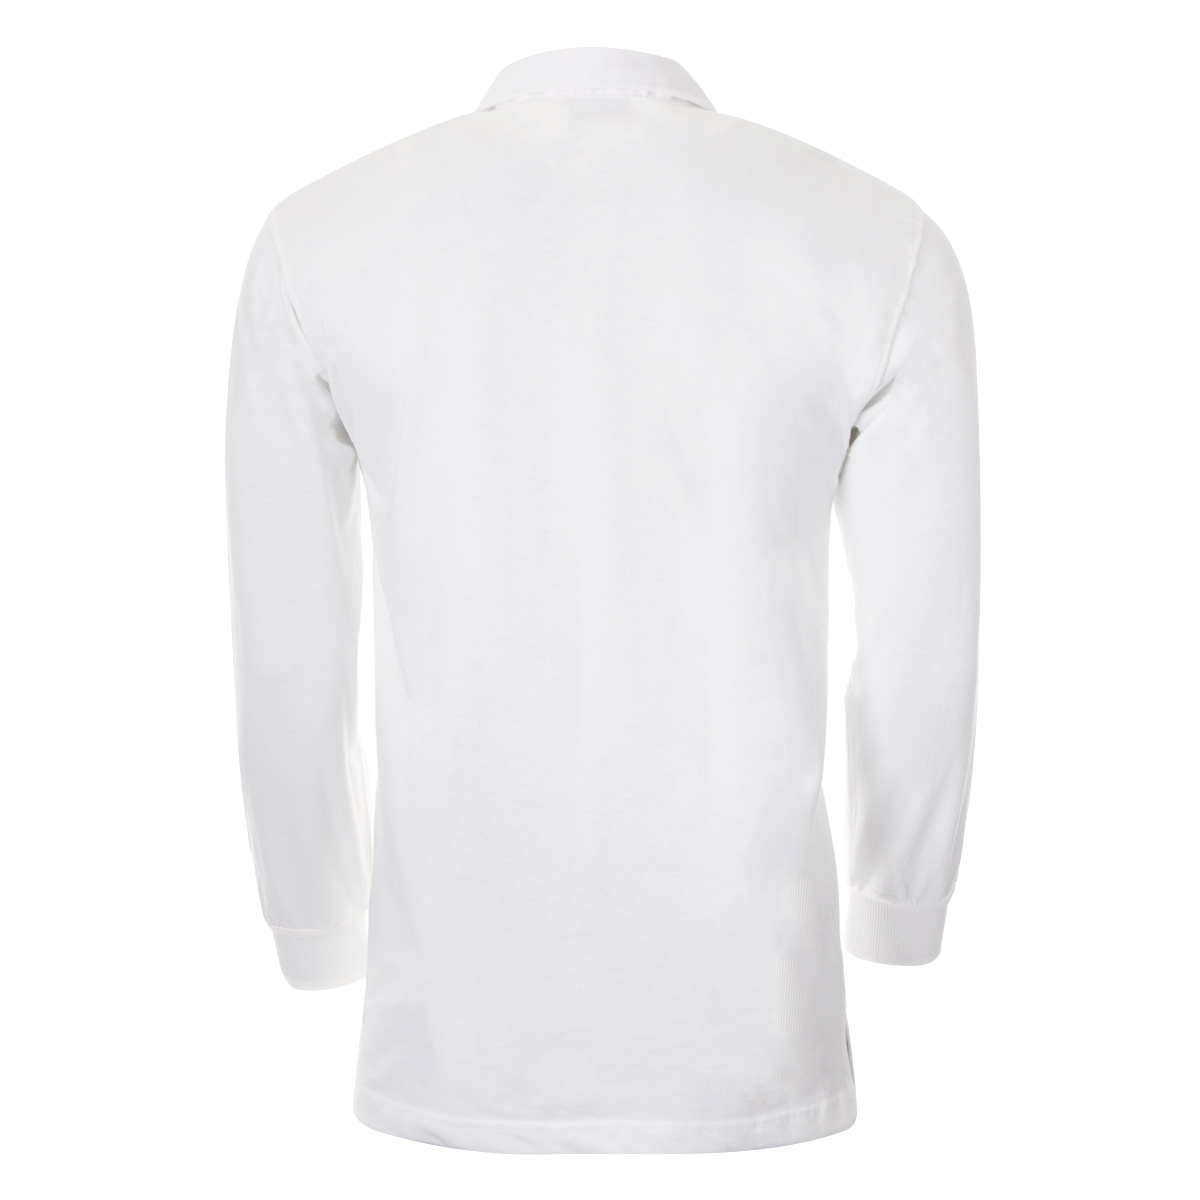 England Womens Rugby World Cup Classic Rugby Shirt - Long Sleeve White ...